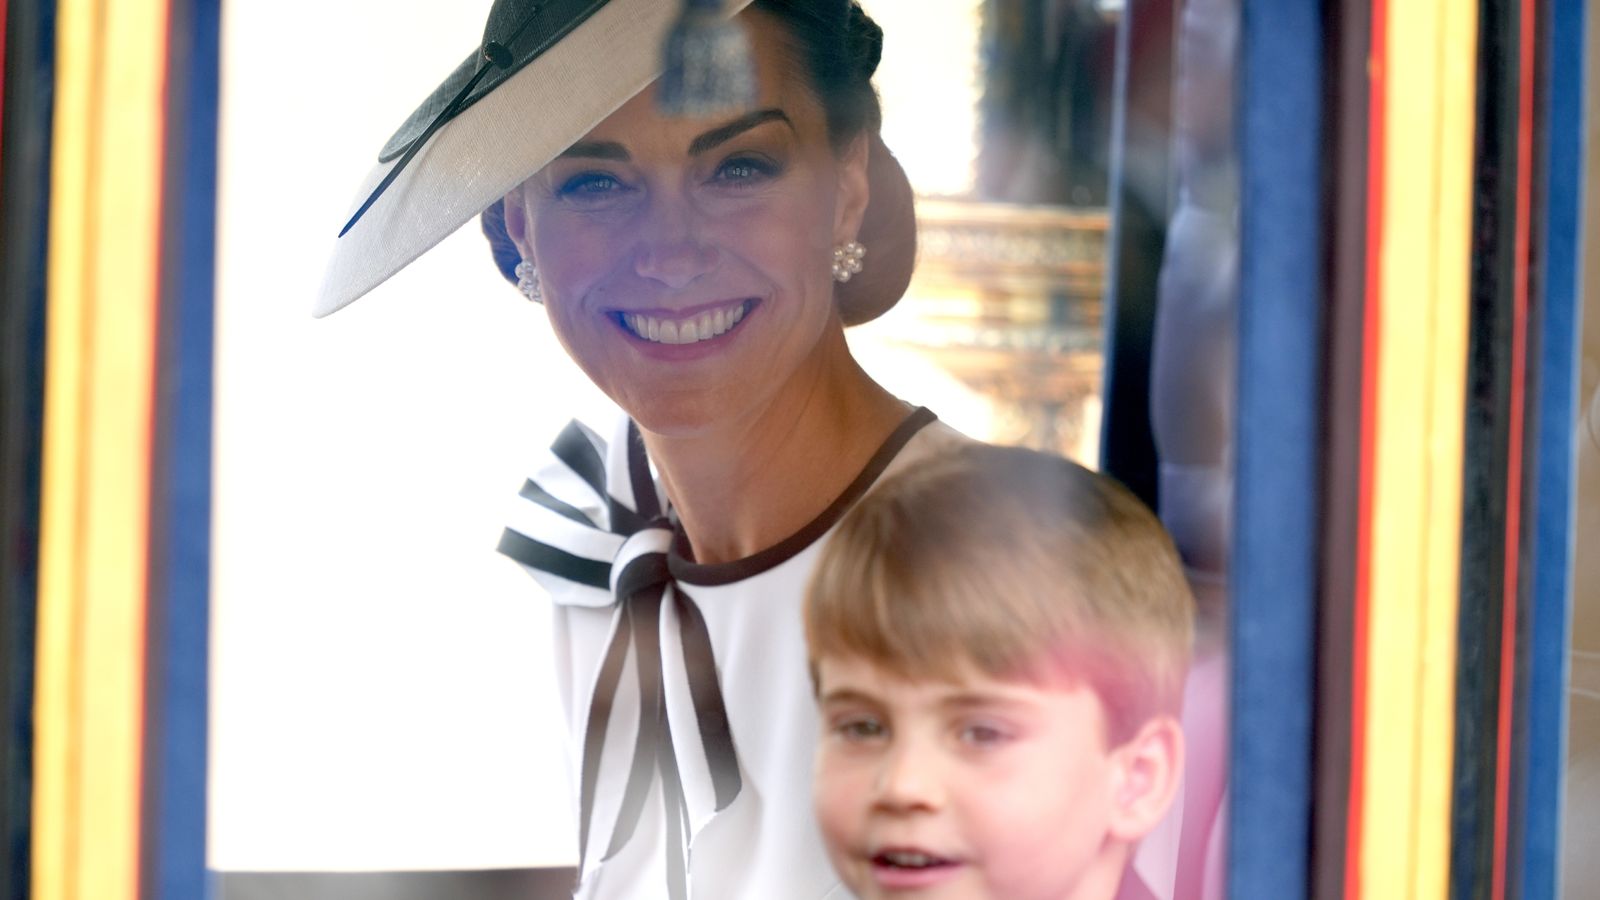 Beaming Kate returns to royal events at Trooping the Colour - her first public appearance since cancer diagnosis